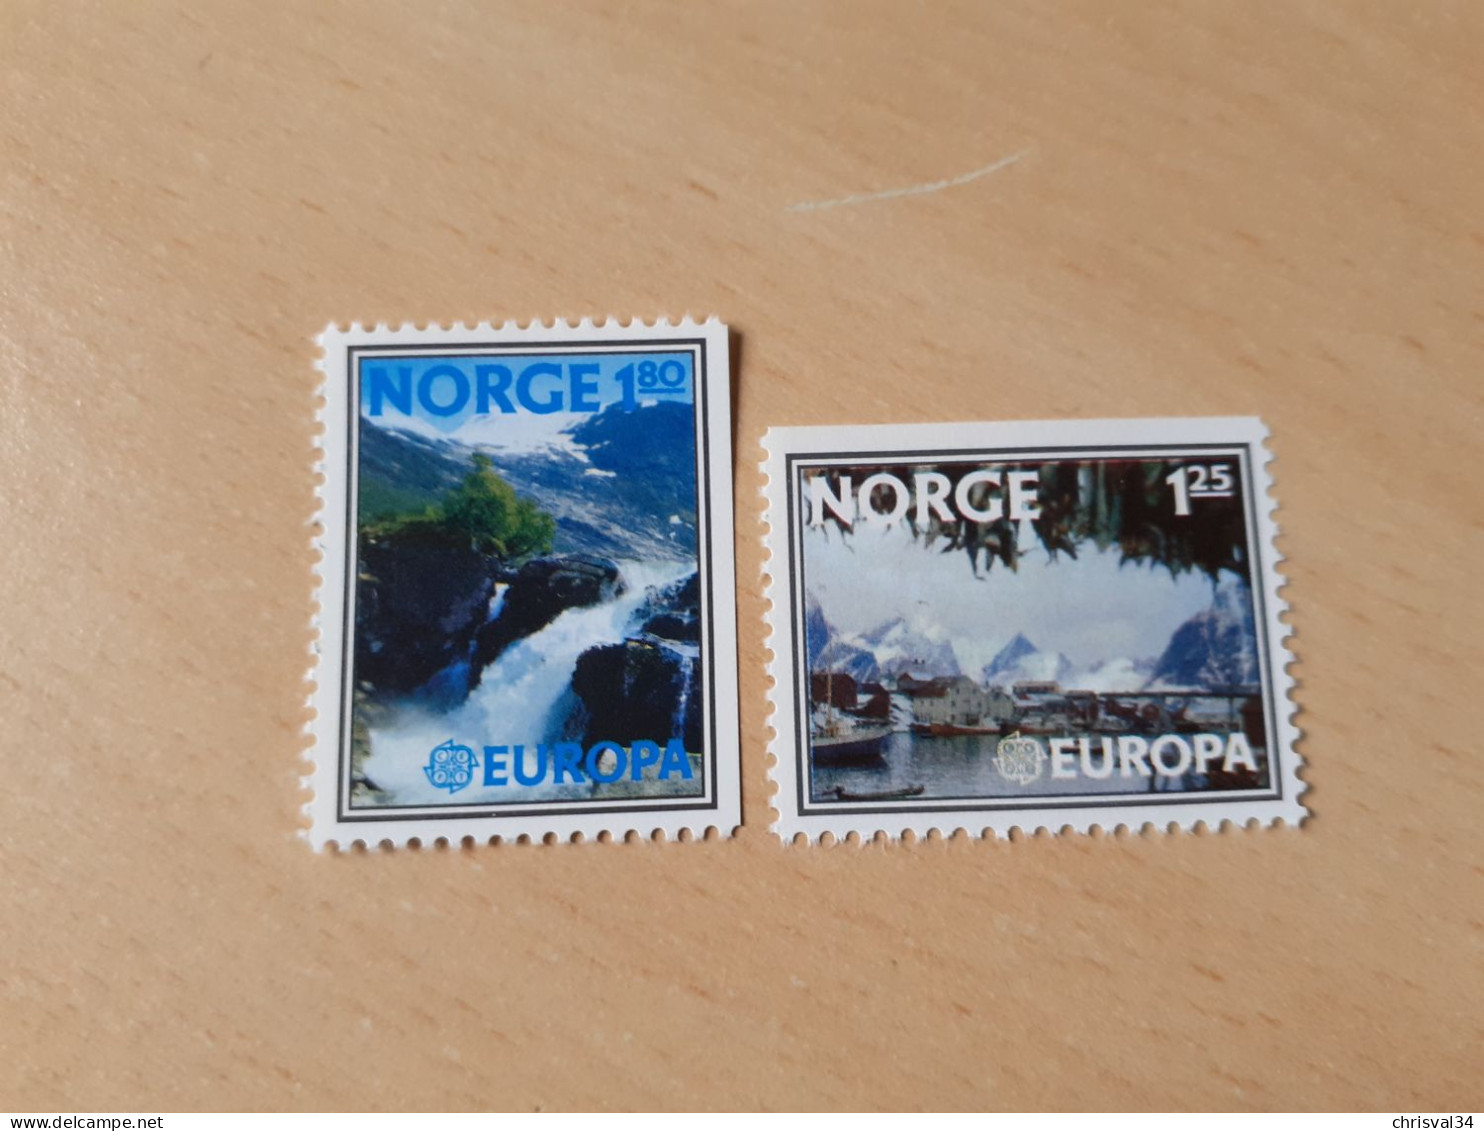 TIMBRES   NORVEGE   ANNEE    1977   N  698a  +  699a   COTE  5,50  EUROS   NEUFS  LUXE** - Neufs